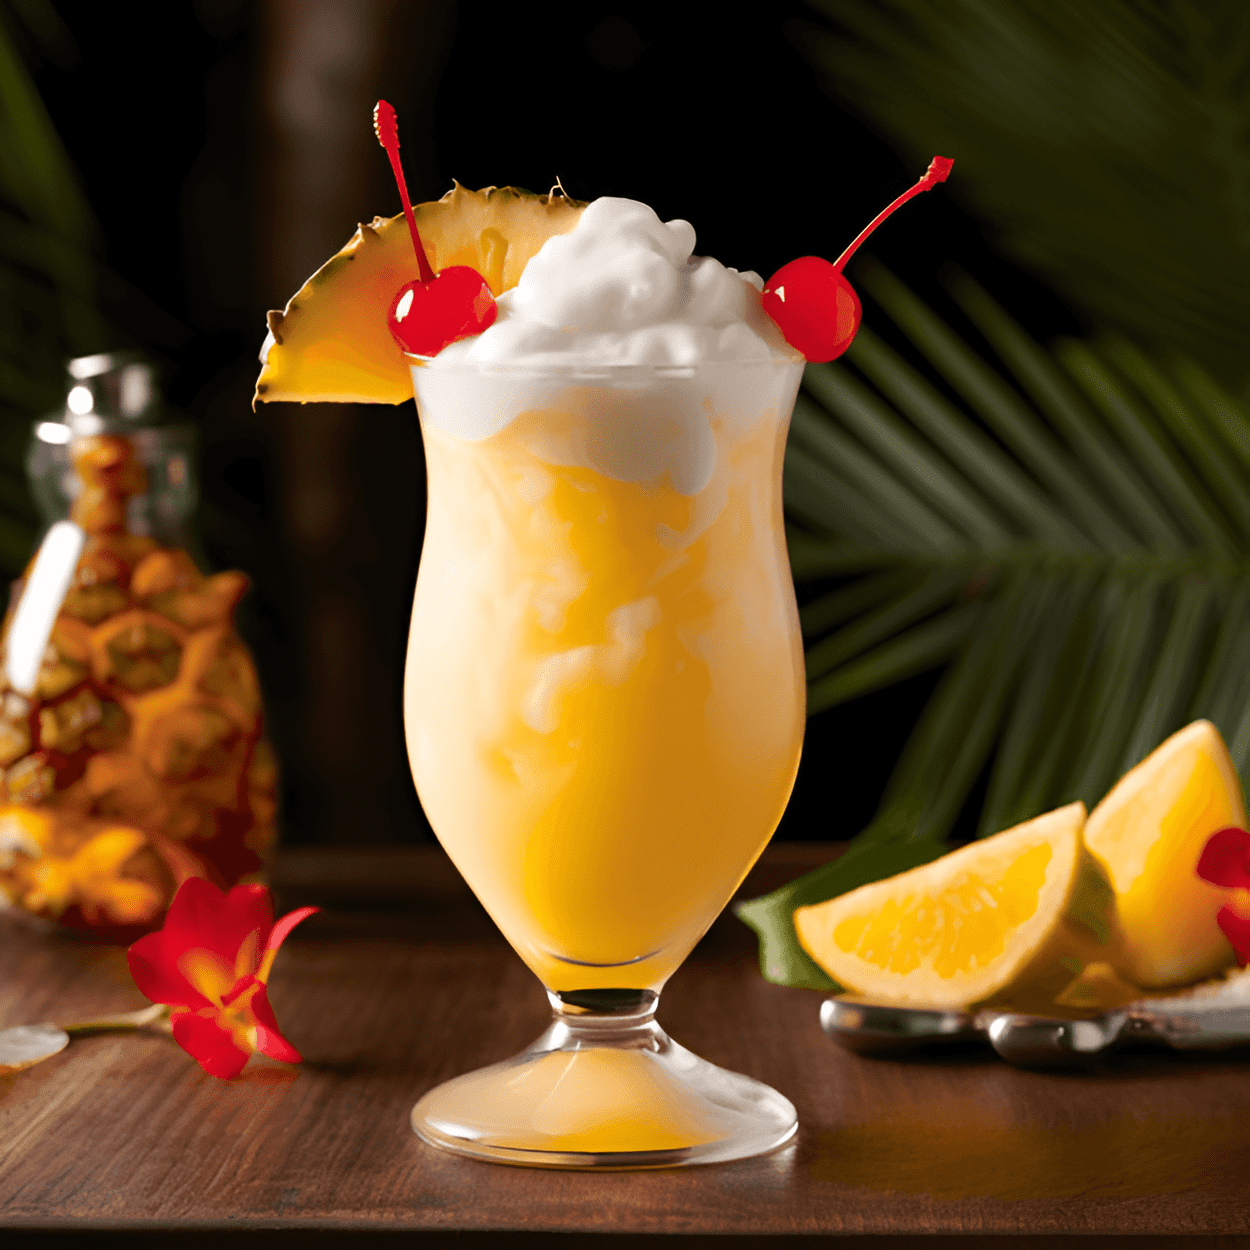 Mango Piña Colada Cocktail Recipe - The Mango Piña Colada is a sweet, creamy, and tropical cocktail. The mango adds a layer of sweetness and tartness, while the coconut cream and pineapple juice give it a creamy and tangy taste. The rum adds a subtle kick, making it a well-balanced and refreshing cocktail.